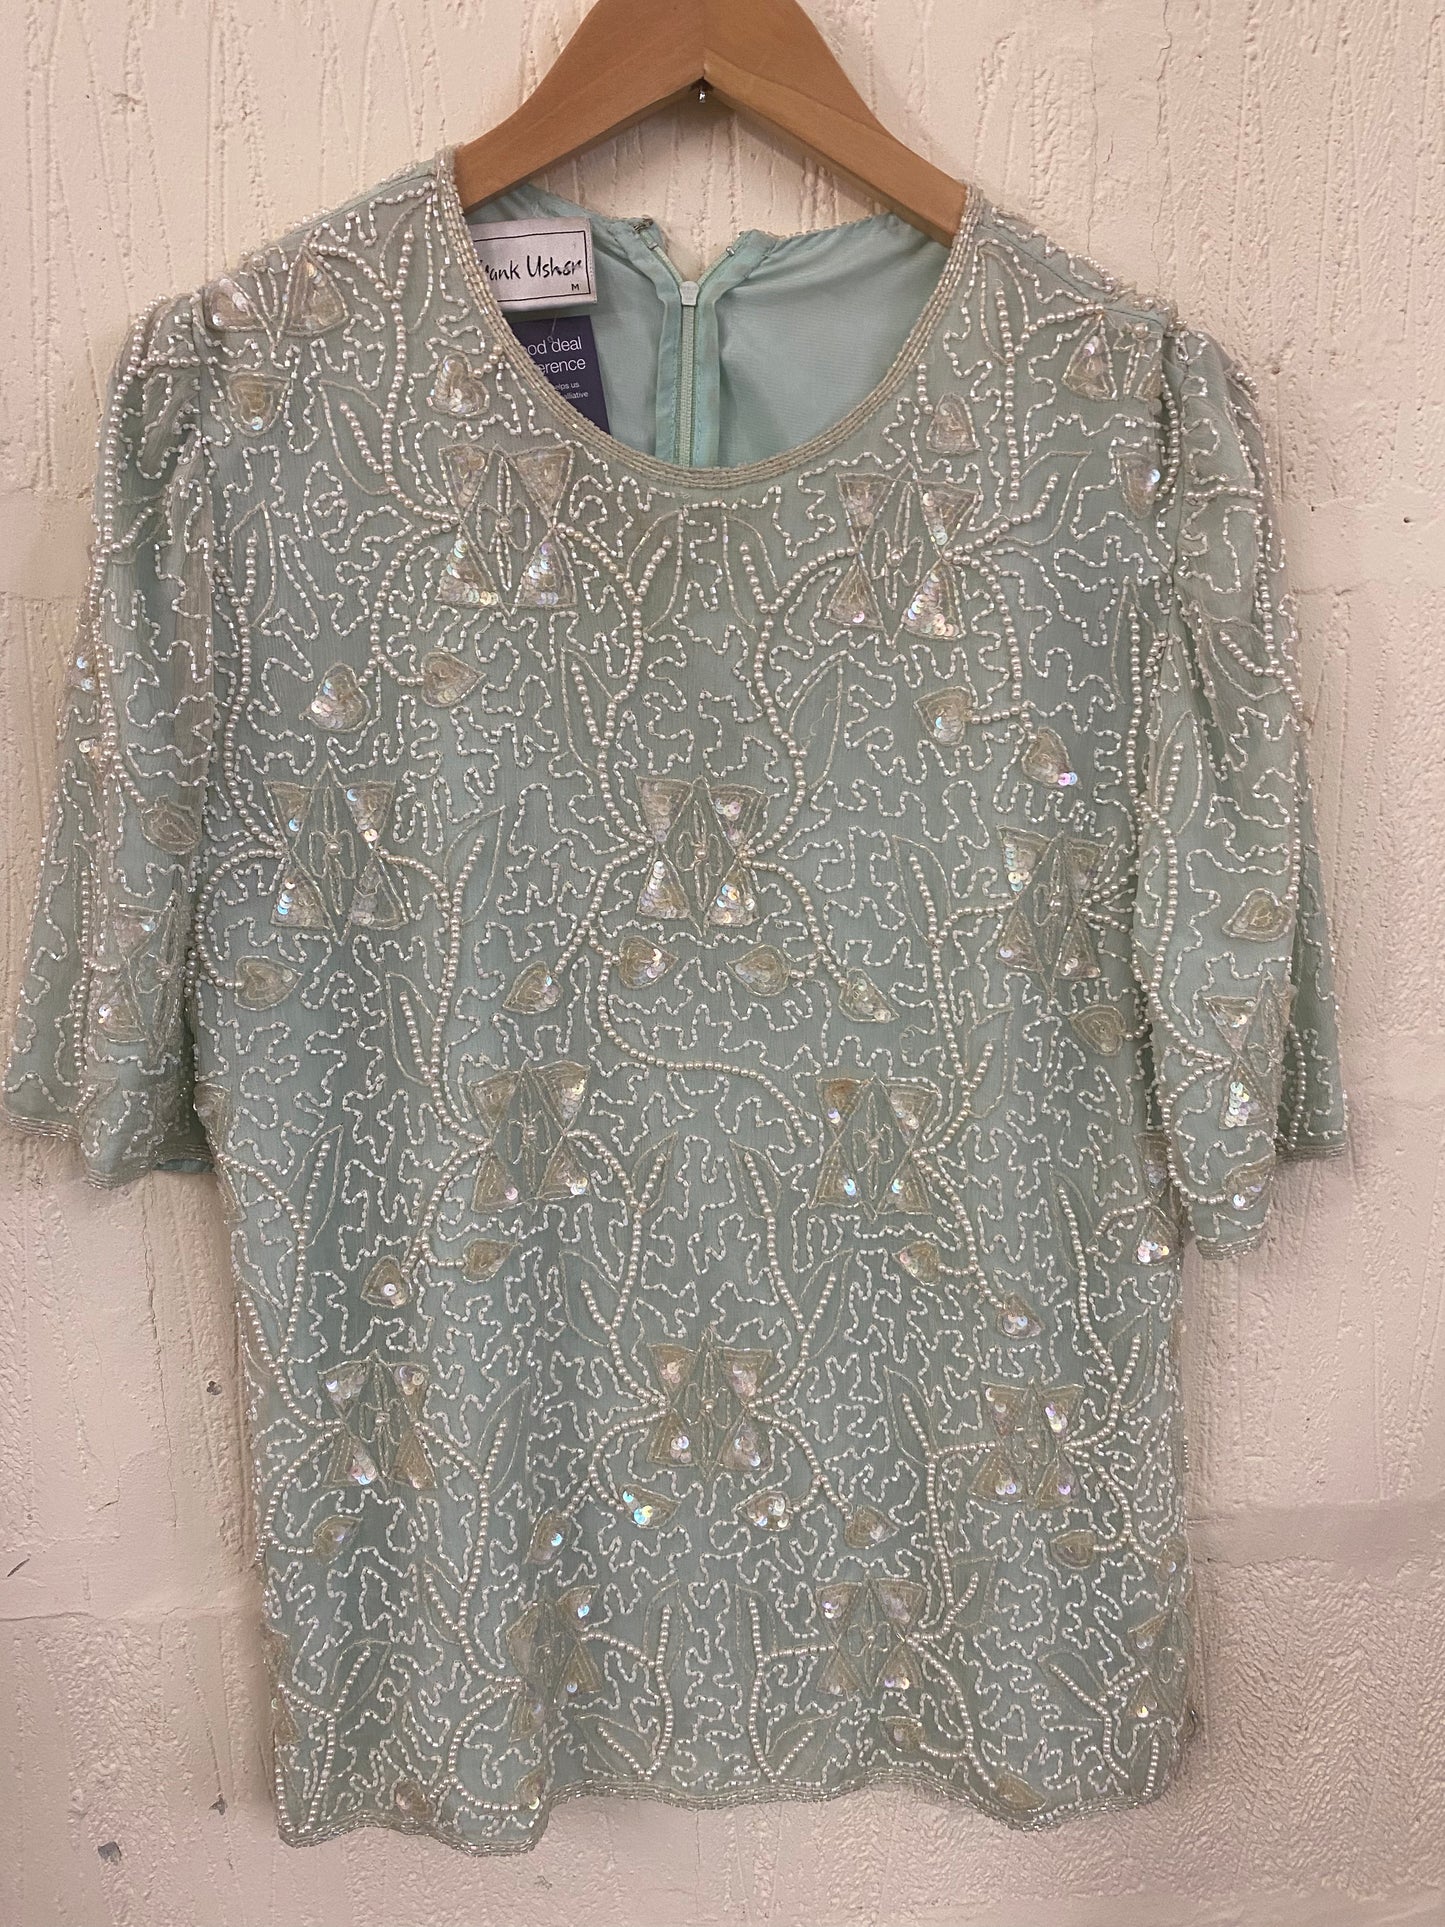 Vintage Light Green Frank Usher Silk and Sequin Top  Size 12-14